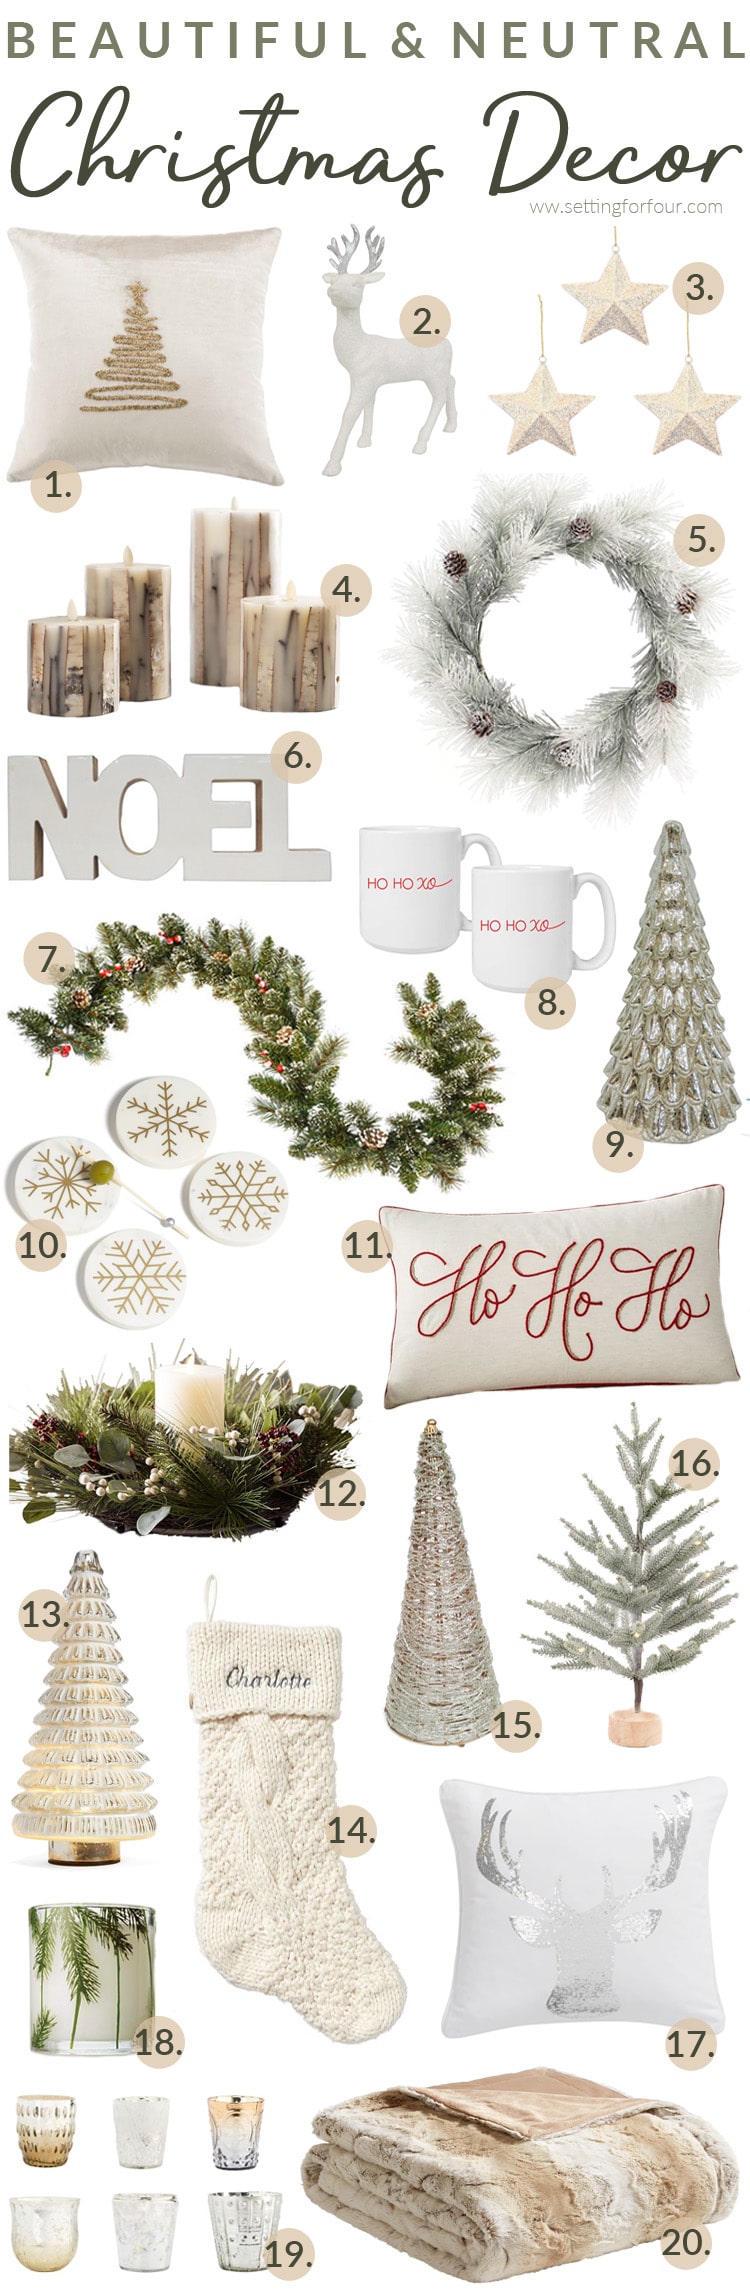 Beautiful & Neutral Christmas Decor Ideas For The Home 